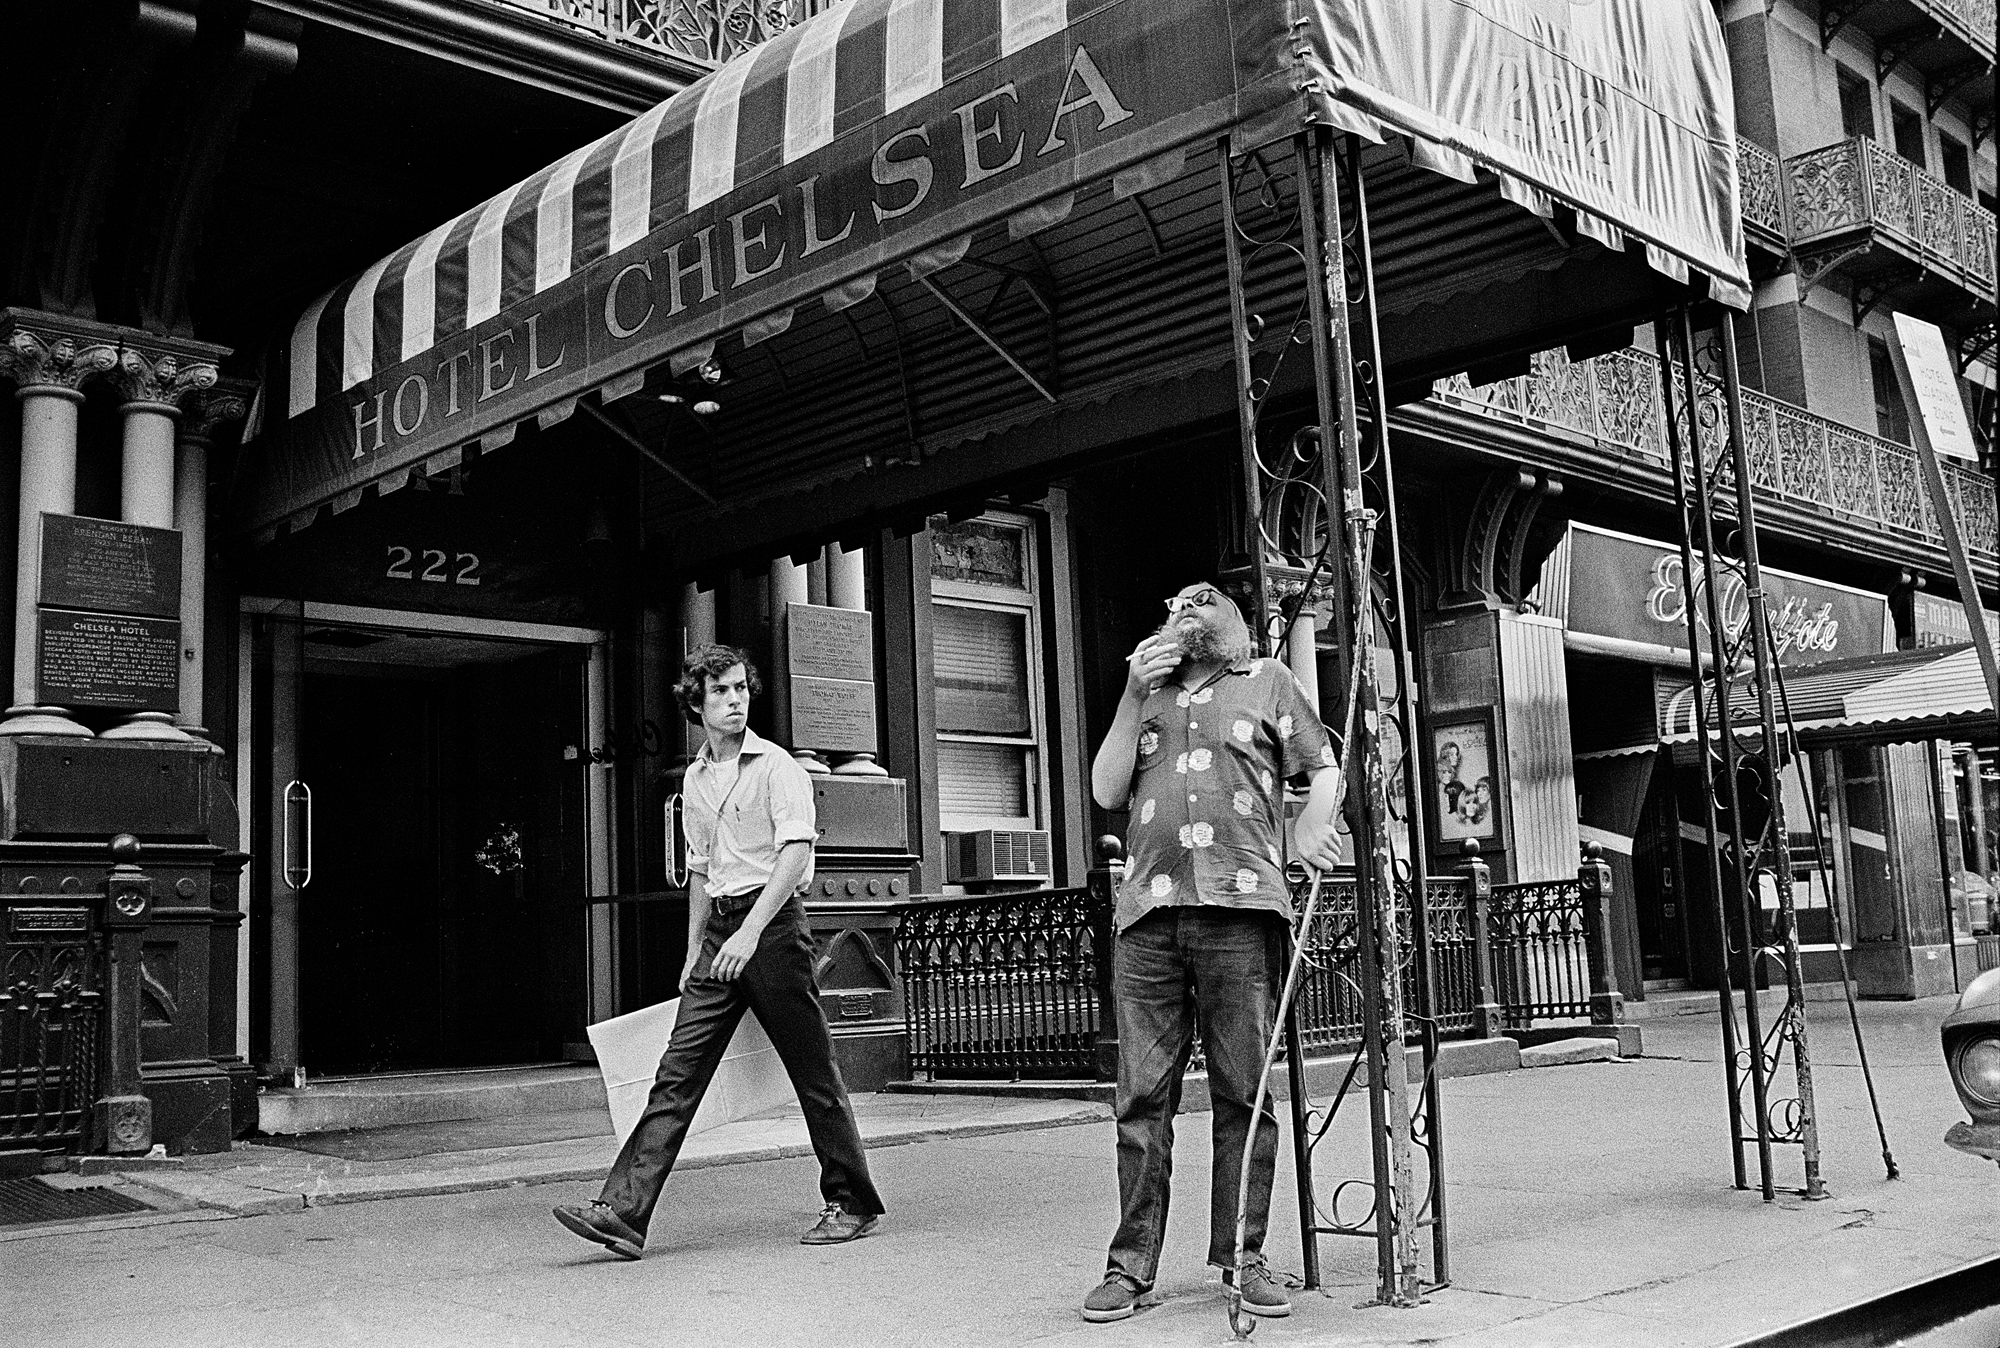  Video artist  Harry Smith  smokes a cigarette in front of the Chelsea Hotel 